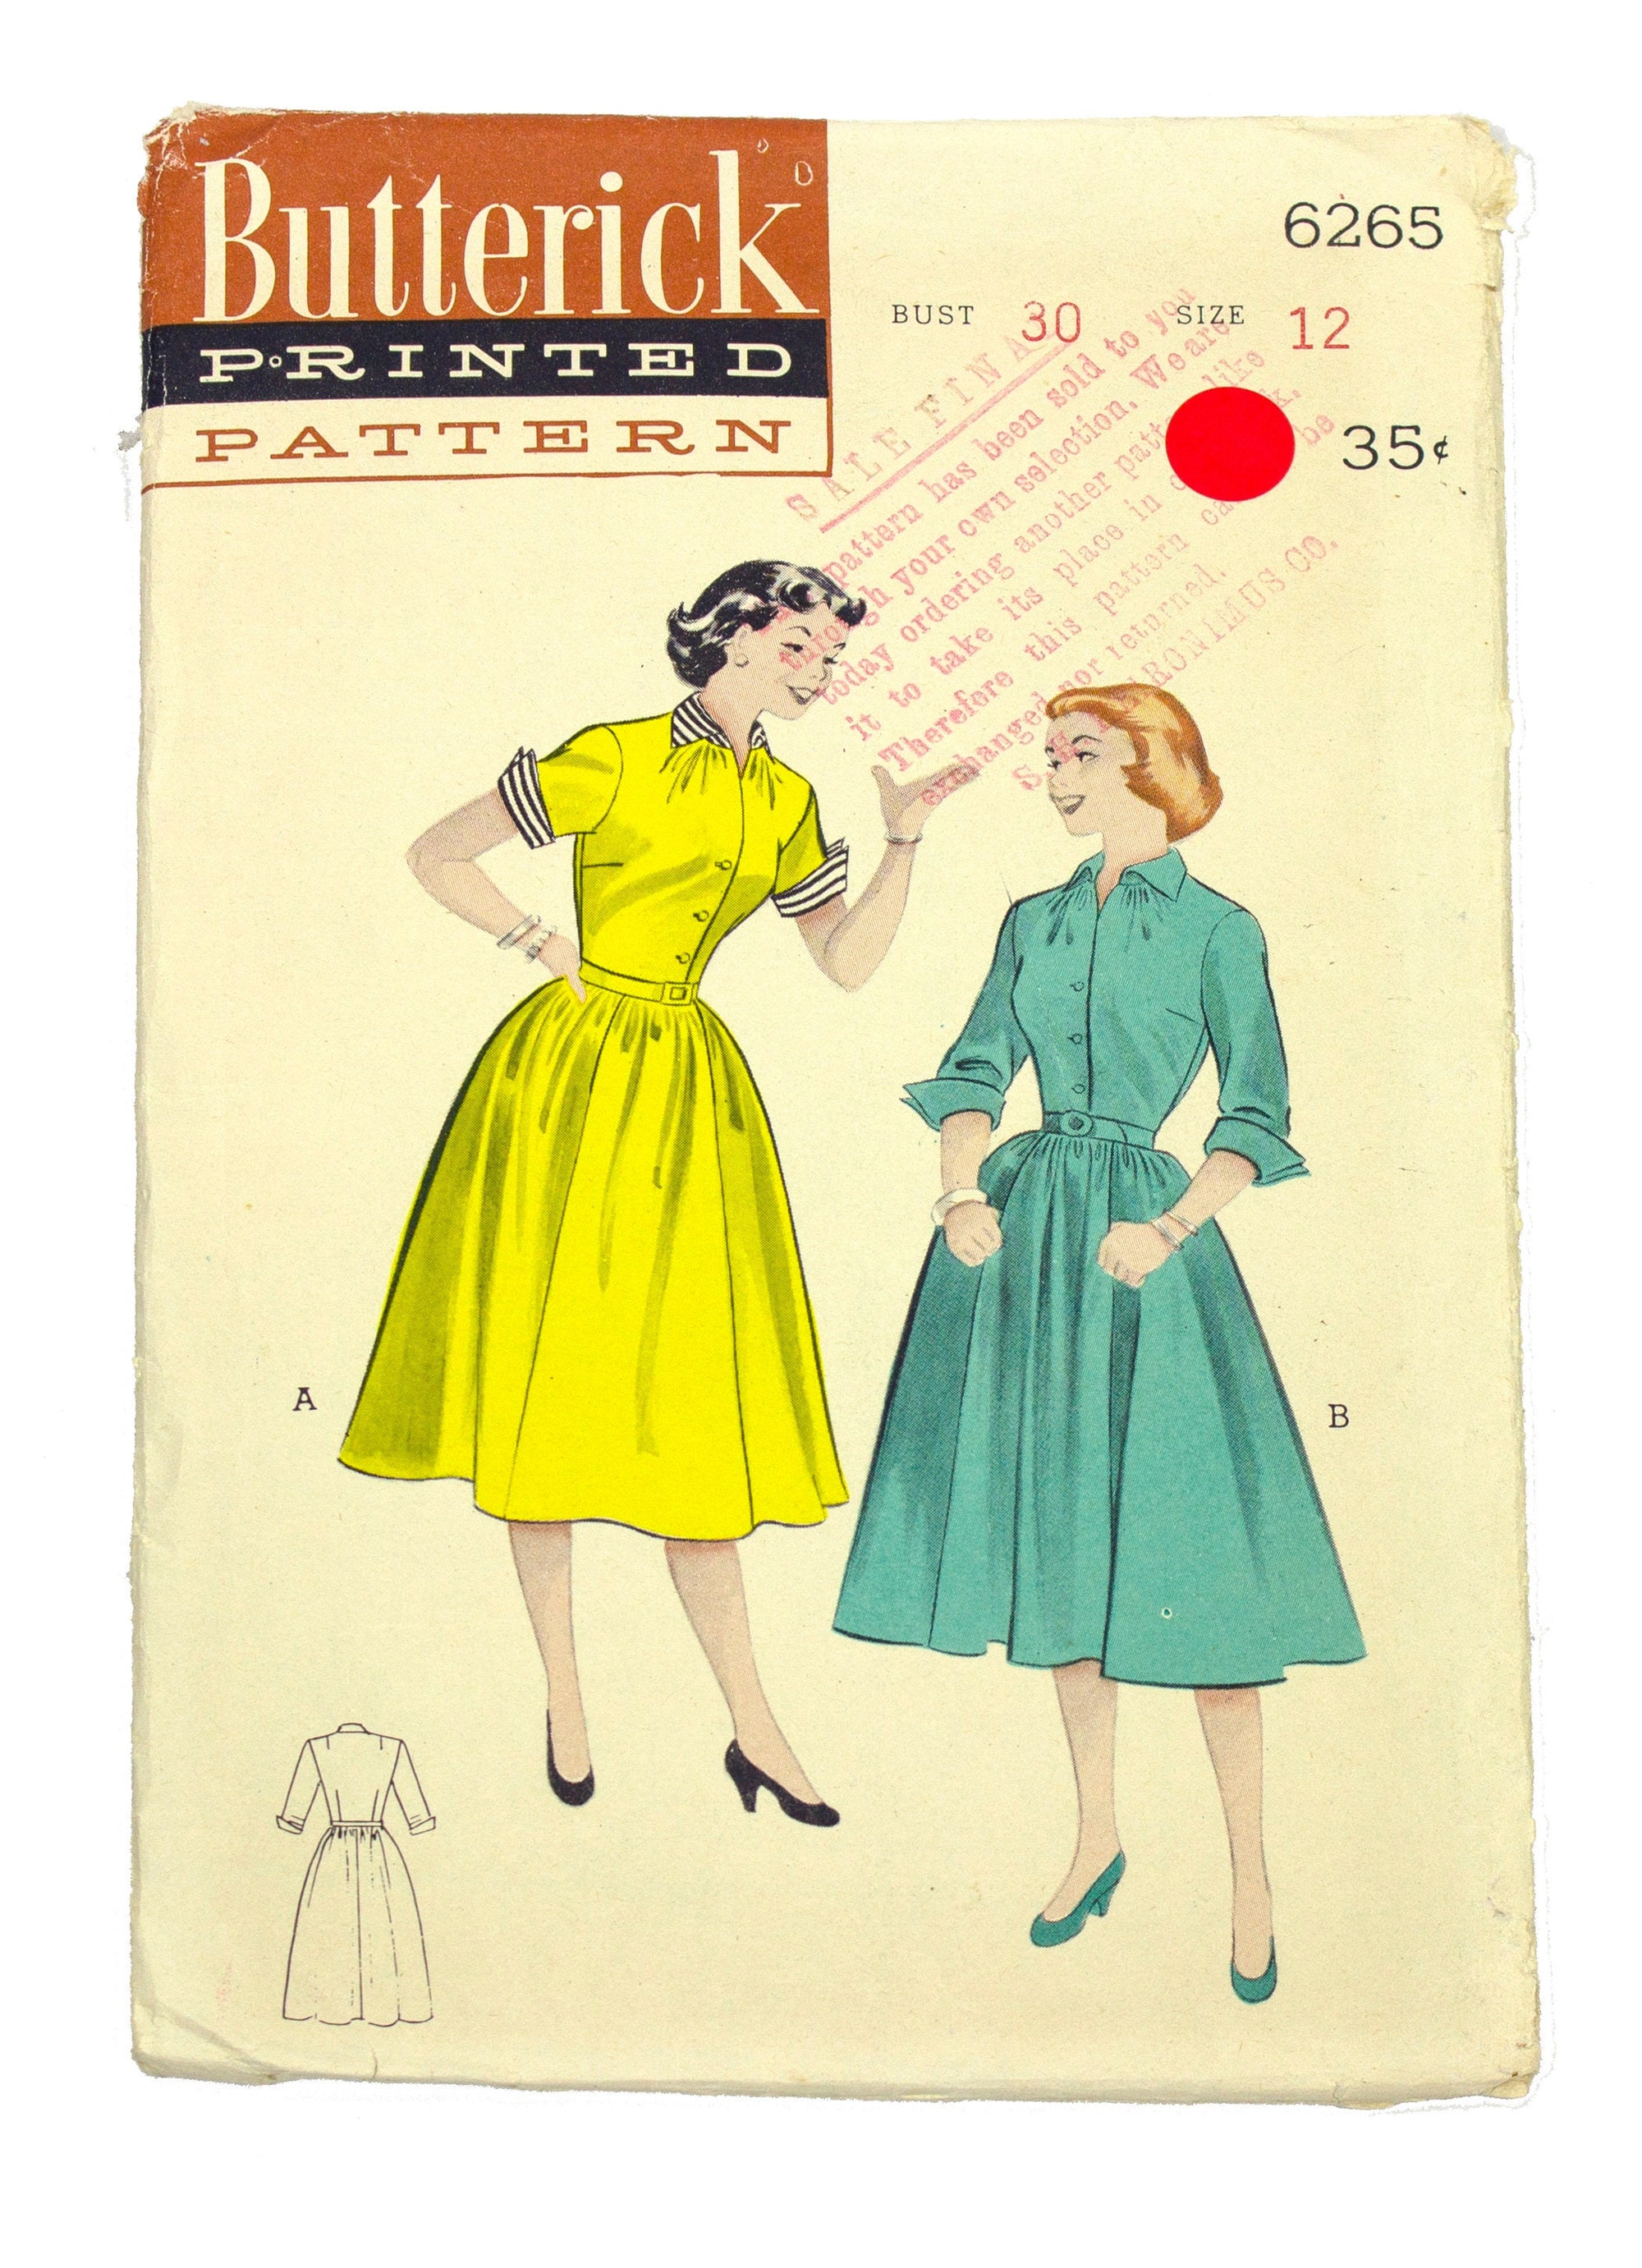 Butterick 6265 Women's Dress with Wing Collar and Cuffs - Size 12 Bust 30